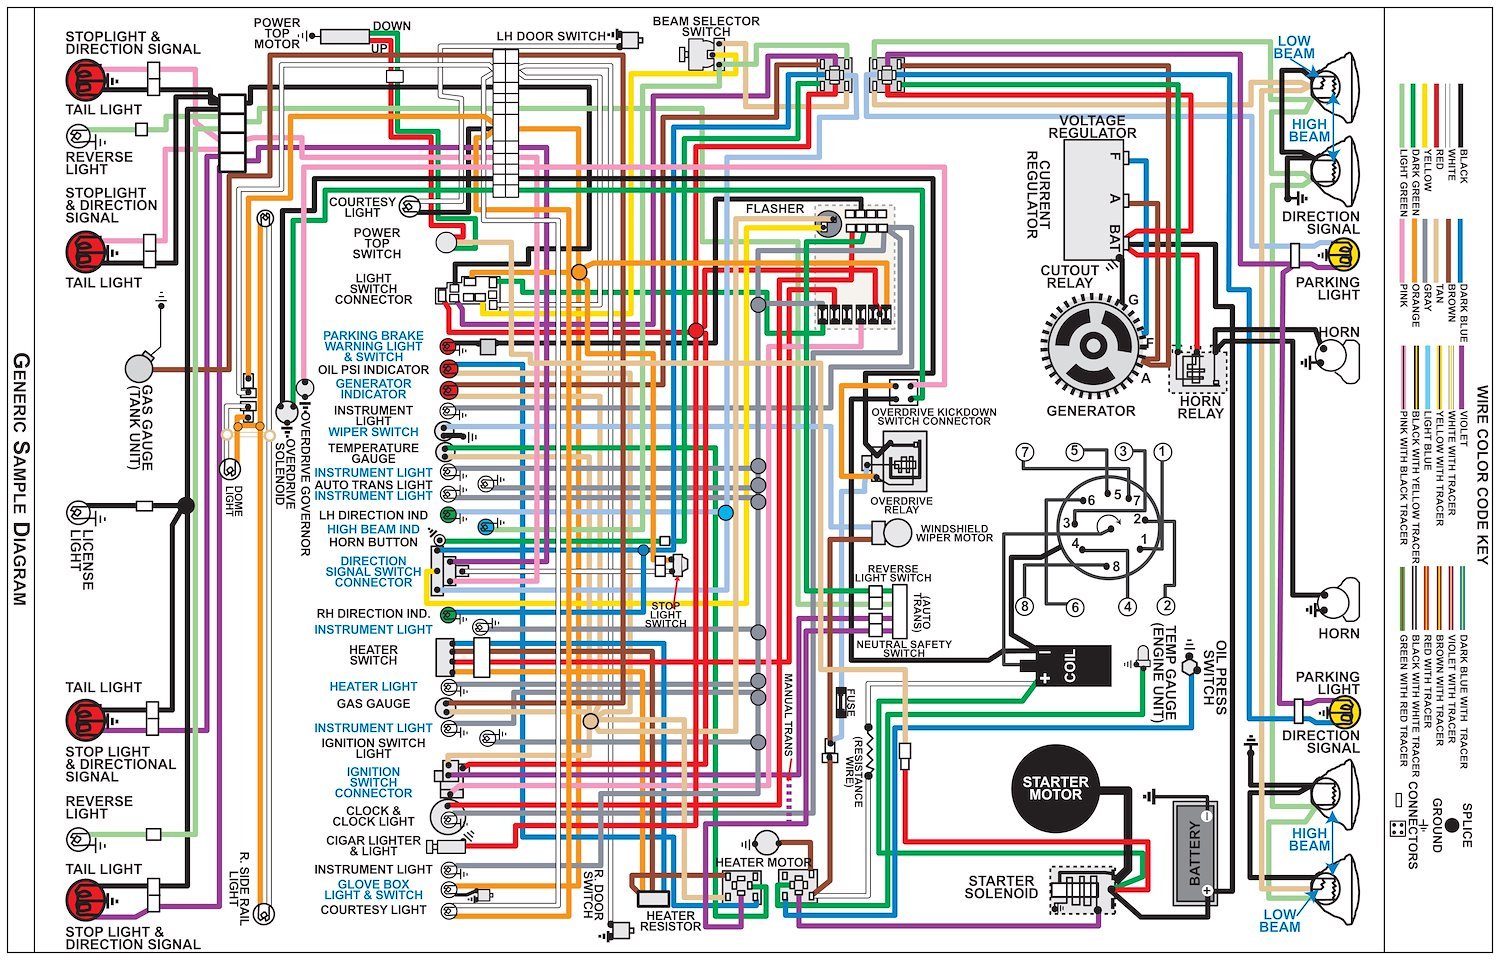 Wiring Diagram for 1964 Ford Fairlane, 11 in x 17 in., Laminated